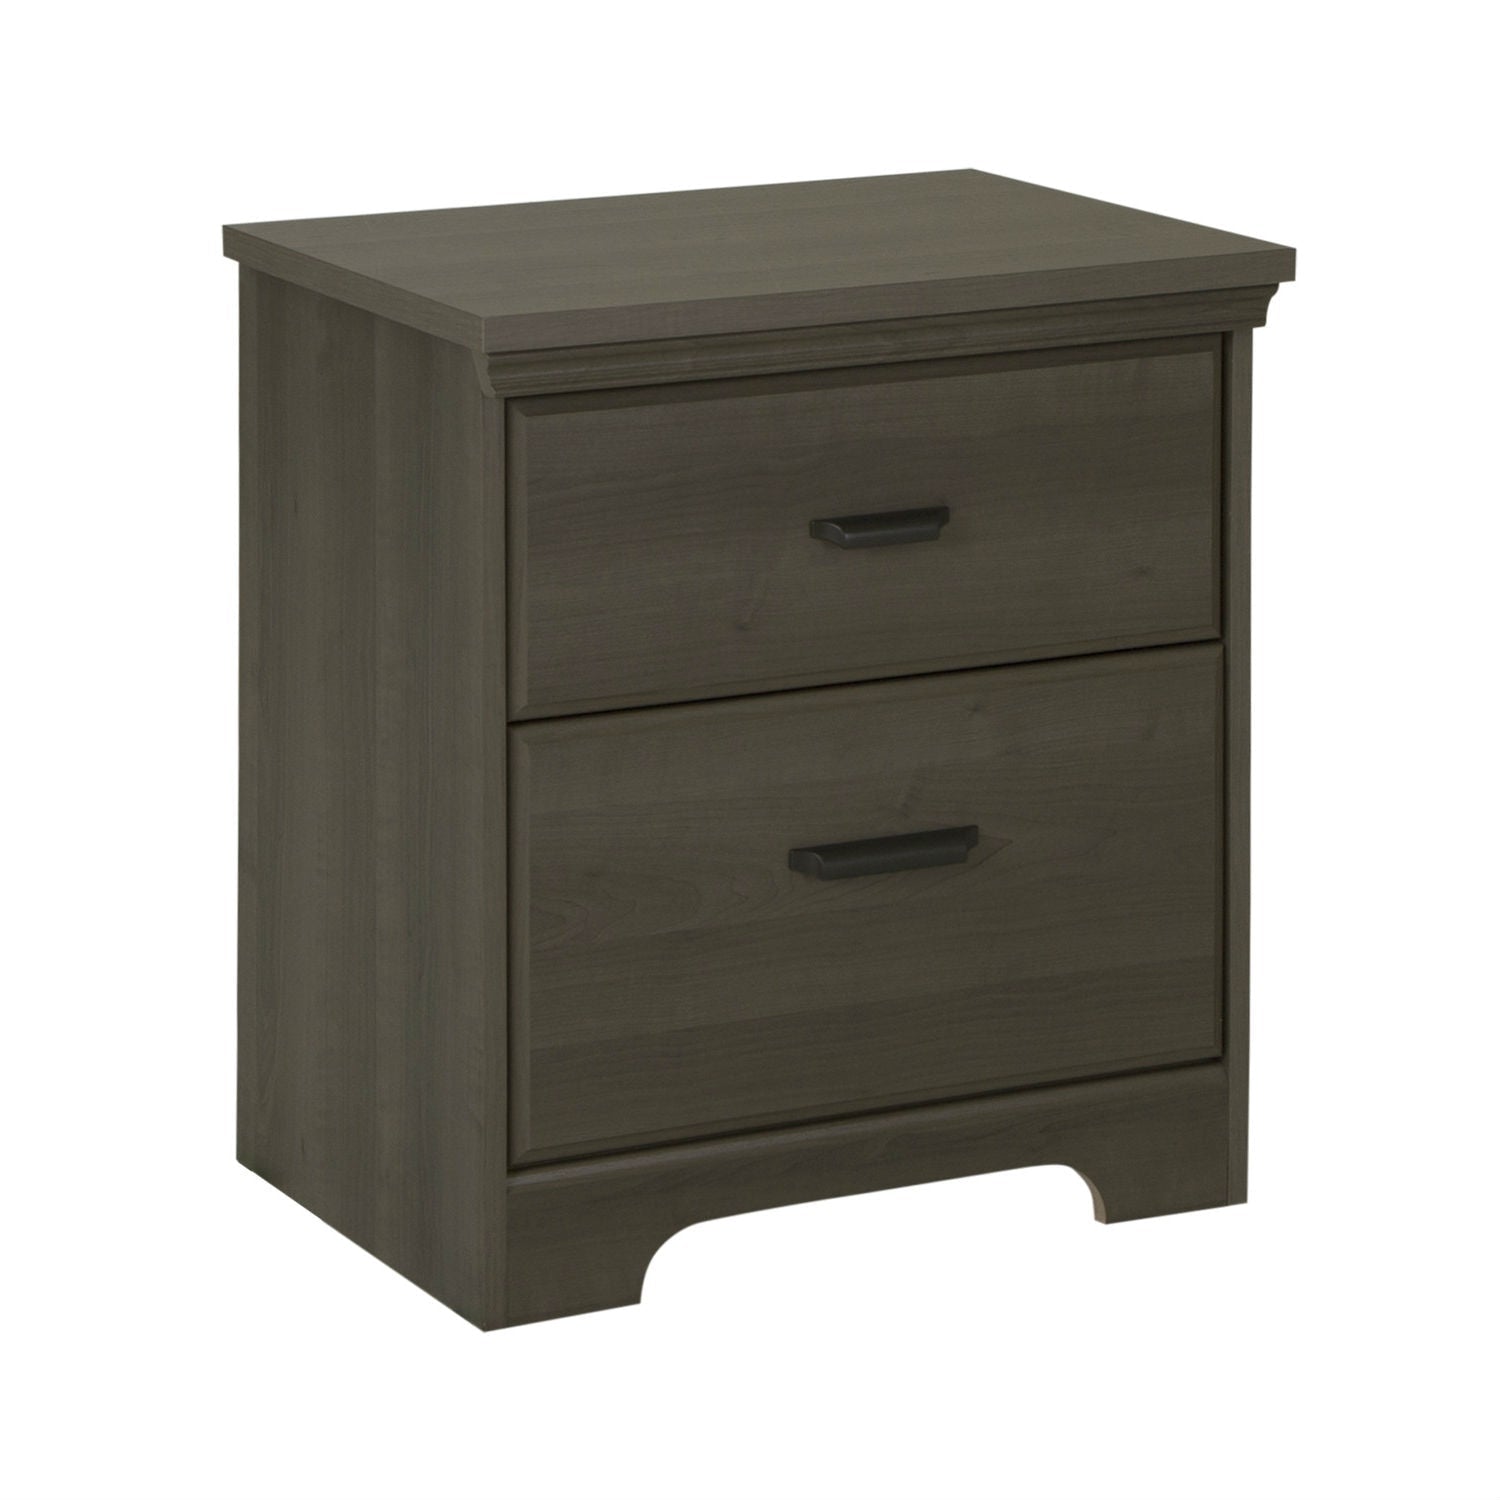 Bedroom > Nightstand And Dressers - 2-Drawer Bedroom Nightstand In Gray Maple Wood Finish